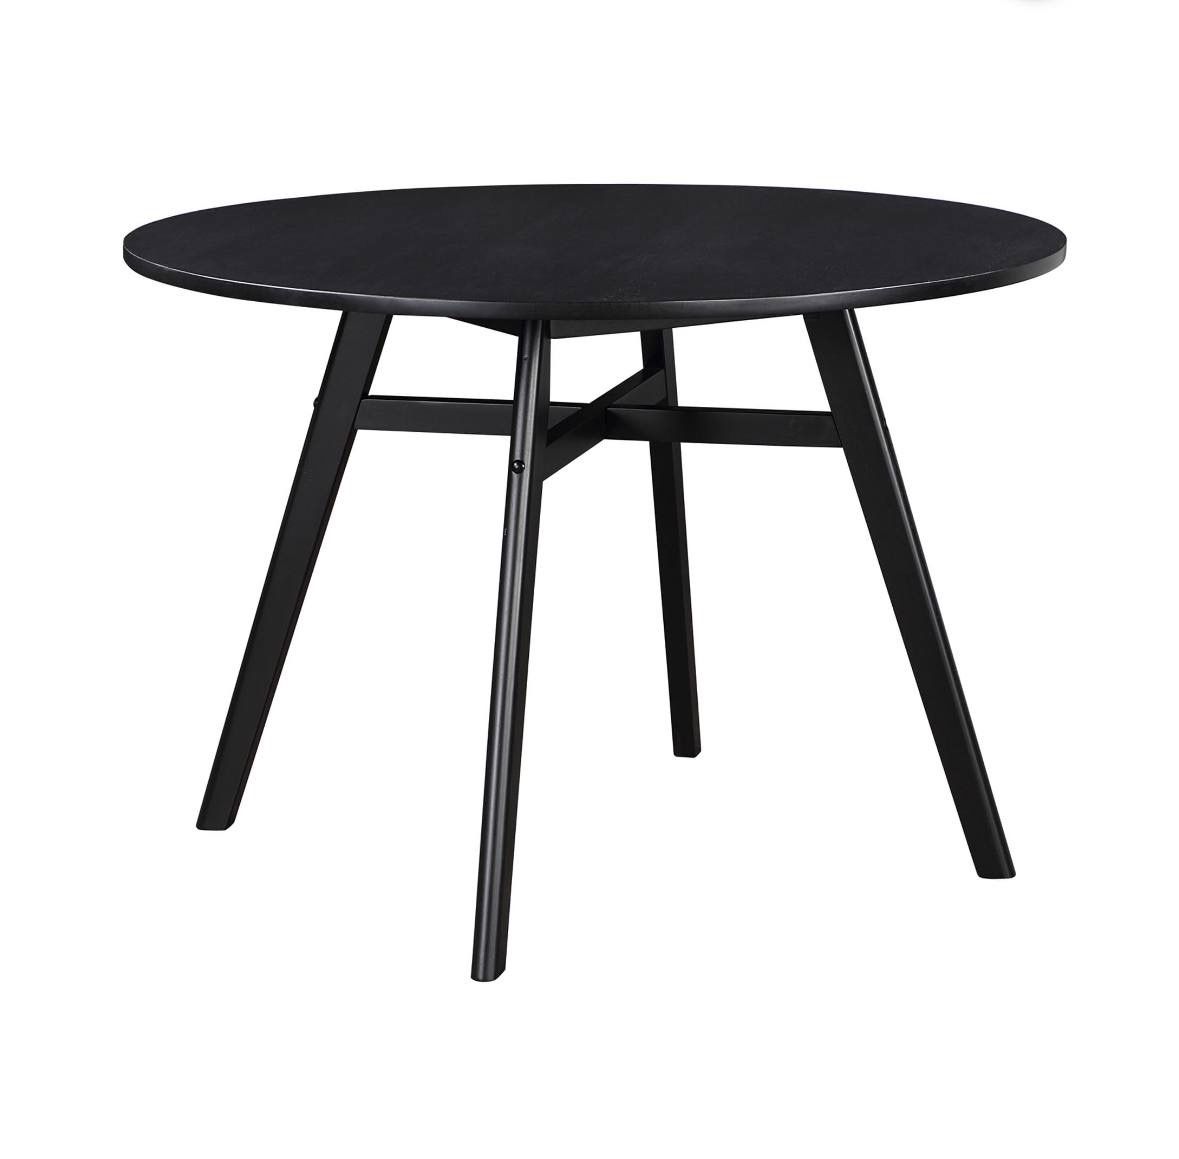 Mainstays 44" Solid Wood Round Dining Table, Black Color for Home and Kitchen. Assembled